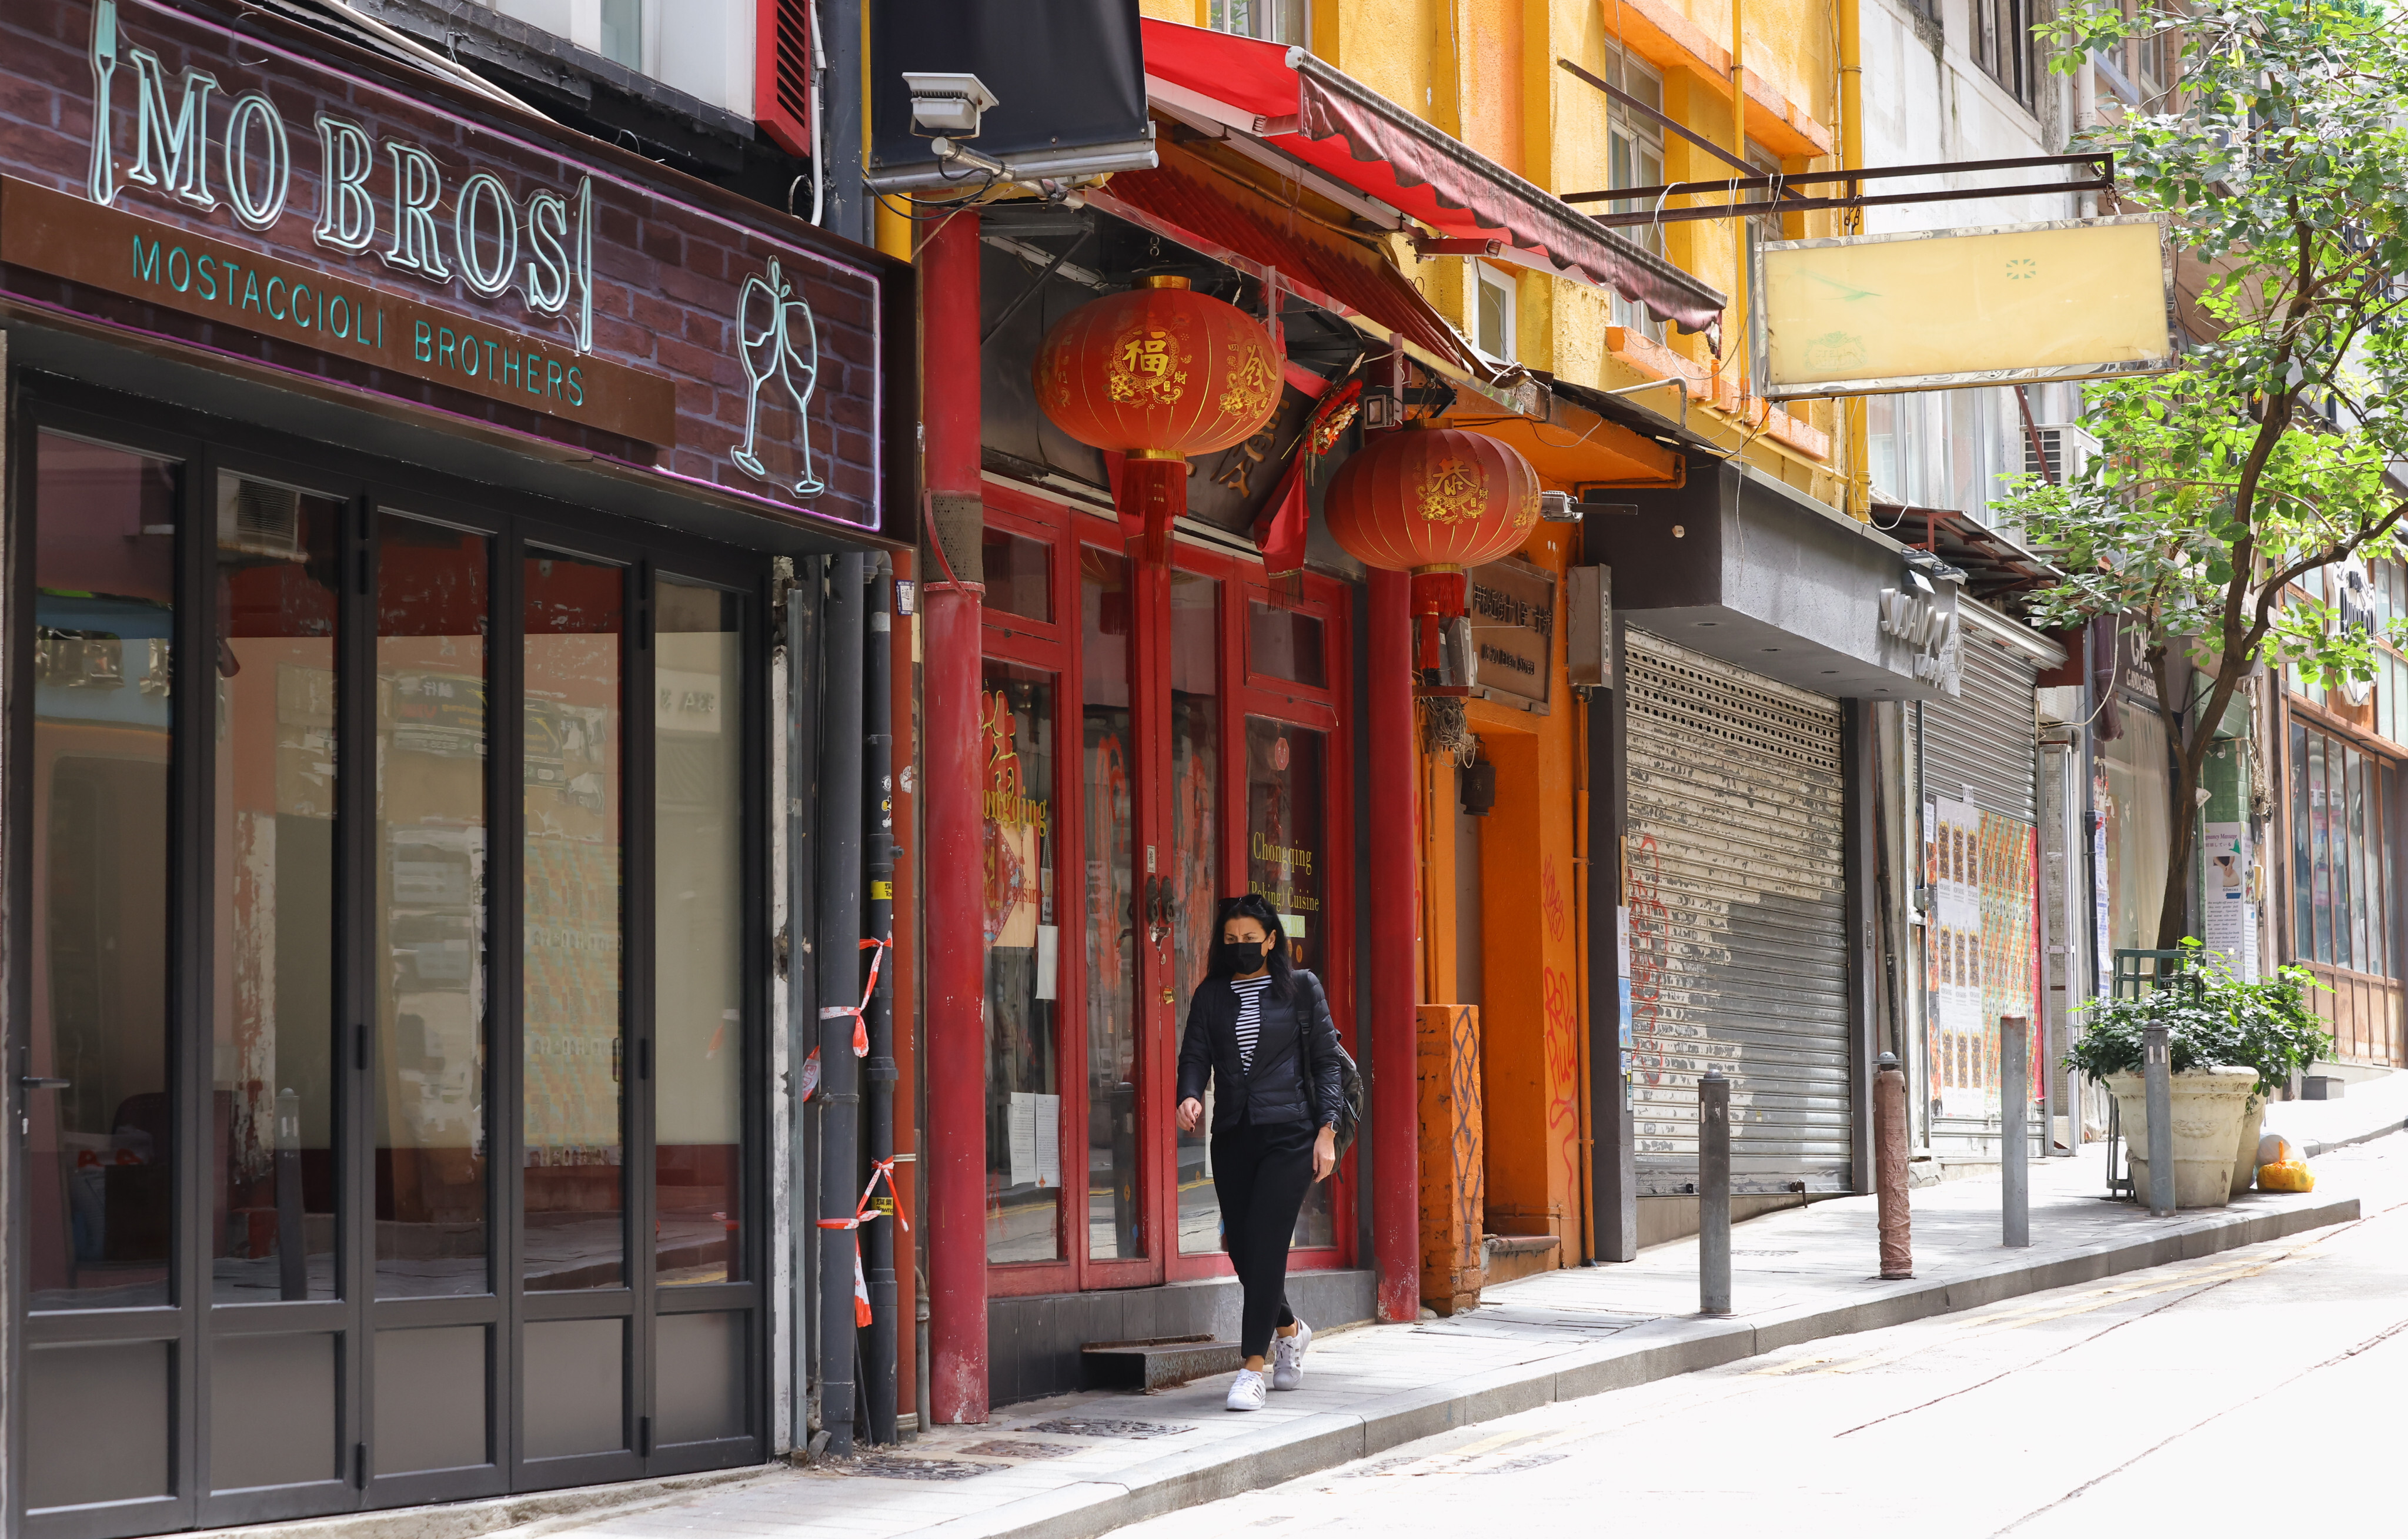 A woman walks down a deserted street with shuttered shops in SoHo, Hong Kong, on February 28. Photo: Dickson Lee